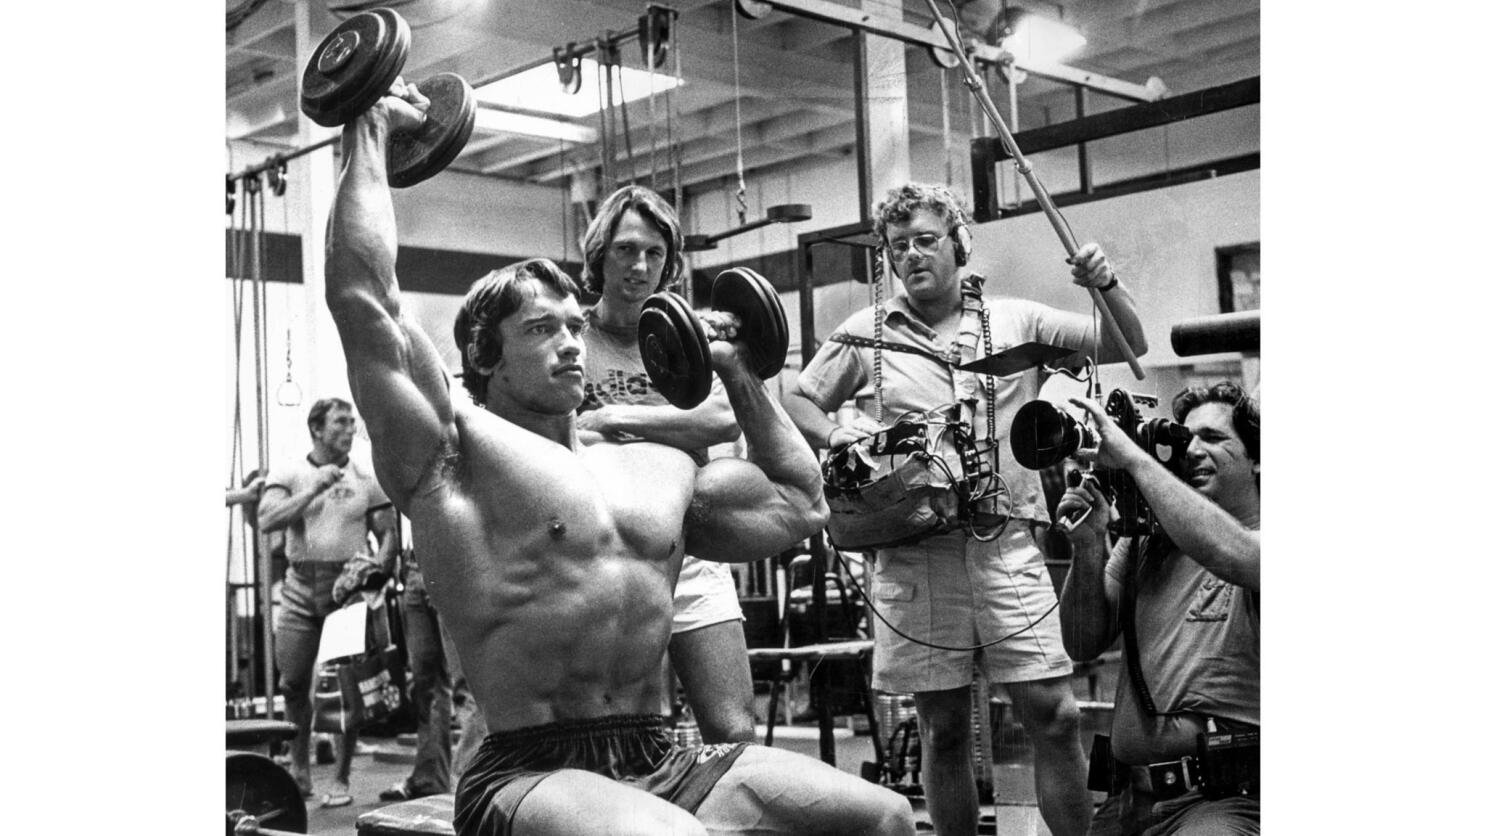 From the Archives: Arnold pumping iron - Los Angeles Times